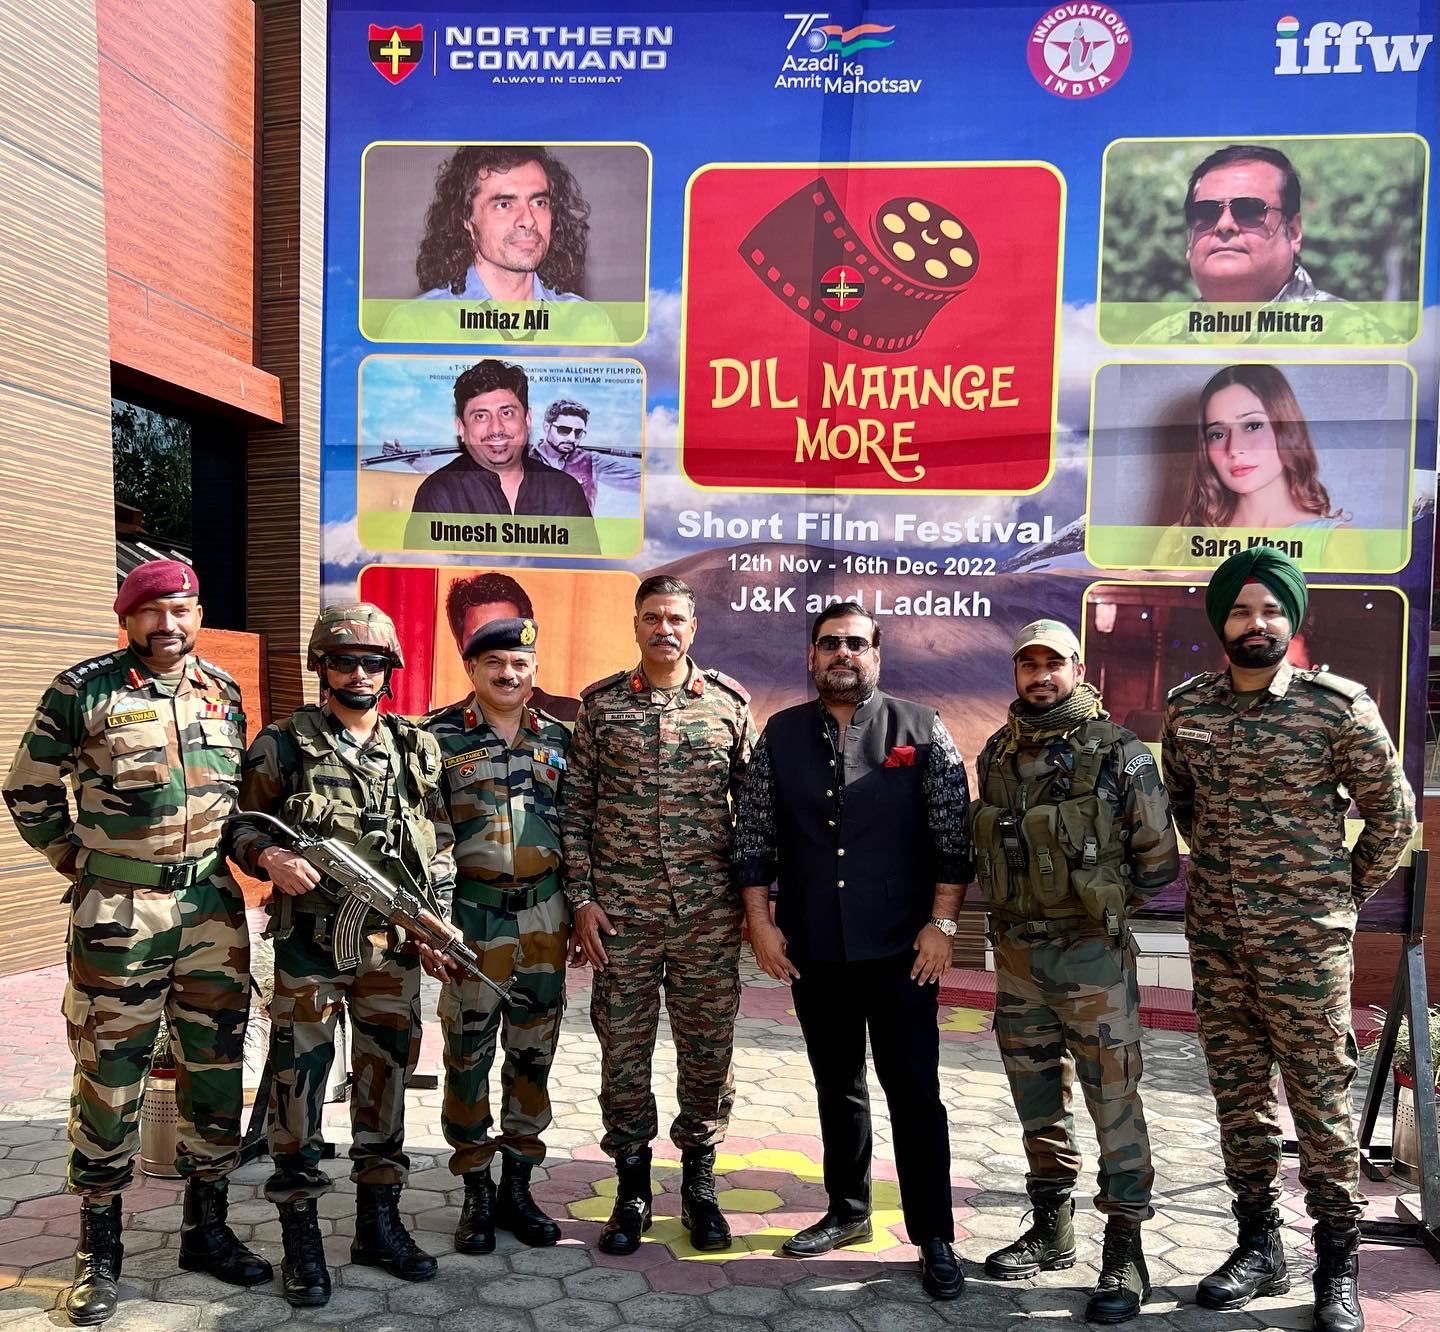 Rahul Mittra & Imtiaz Ali launch Indian army’s ‘Dil Maange More’ film fest in J&K                         